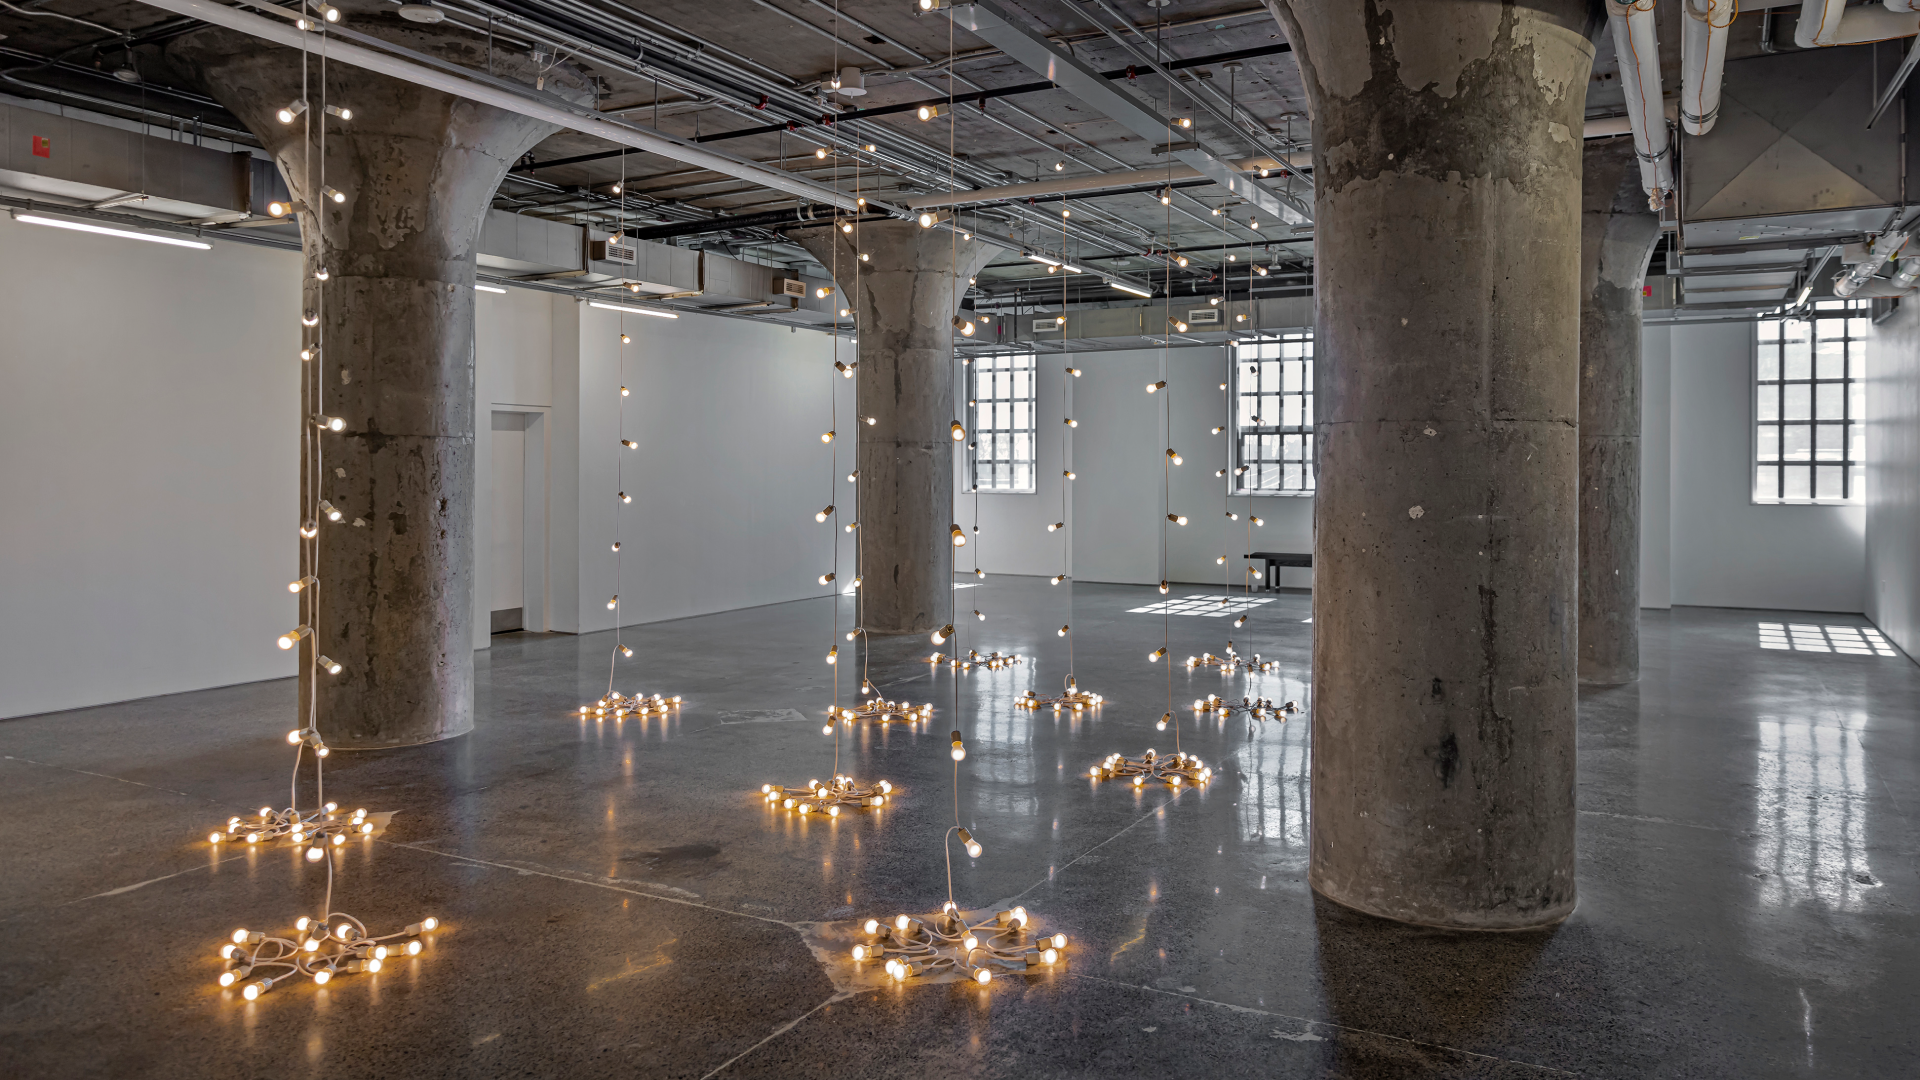 Installation view of the exhibition, Félix González-Torres: Summer, at the Museum of Contemporary Art in Toronto, dated 2022.